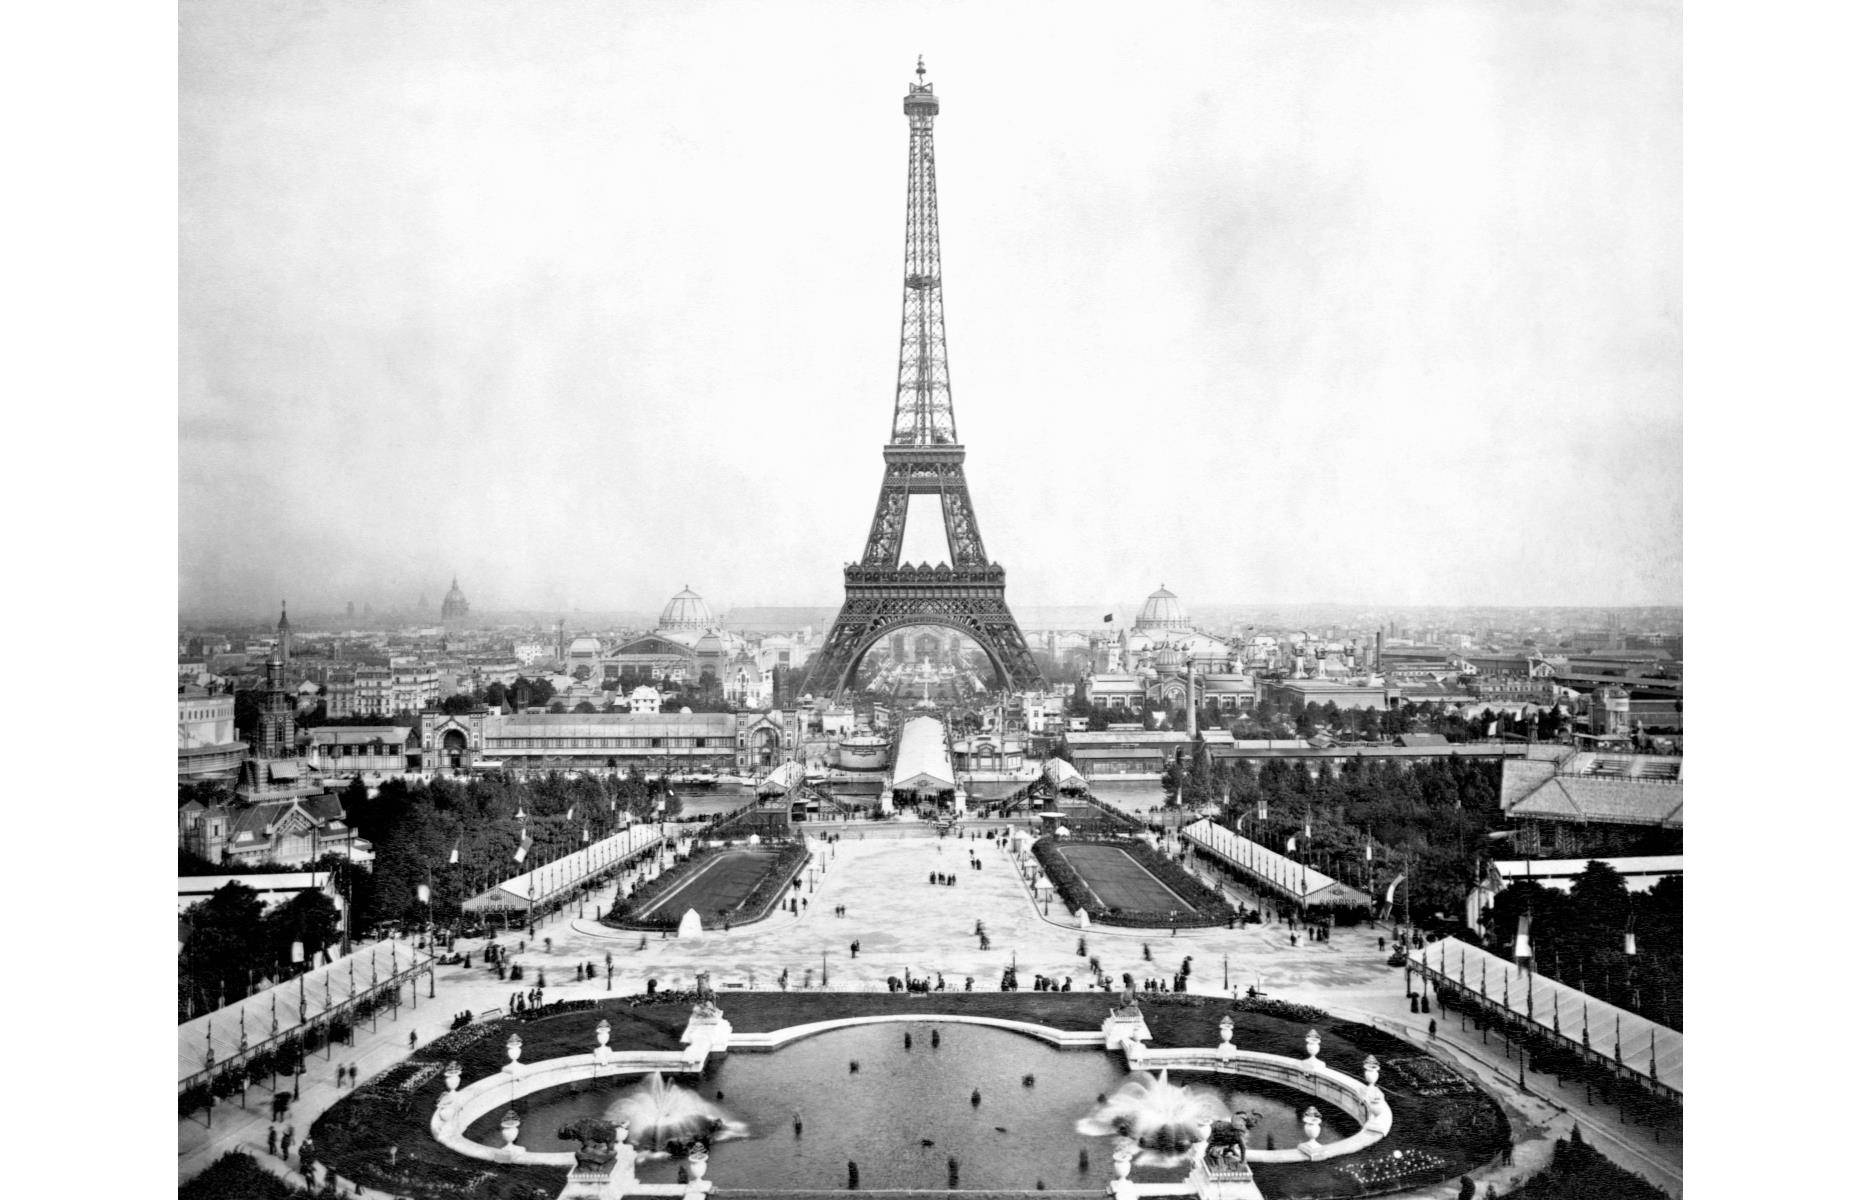 <p>The most recognisable feature of the <a href="https://www.loveexploring.com/guides/64347/what-to-do-in-paris-guide">Paris</a> skyline was built between 1887 and 1889, completed in time for the Paris World’s Fair of 1889 – although it was only supposed to be a temporary structure. Its original licensing rights were only set to last 20 years and it was almost torn down in 1909, but city officials voted to keep it after recognising its value as a radio station. Pictured here in 1889, the Eiffel Tower now attracts around seven million visitors each year. </p>